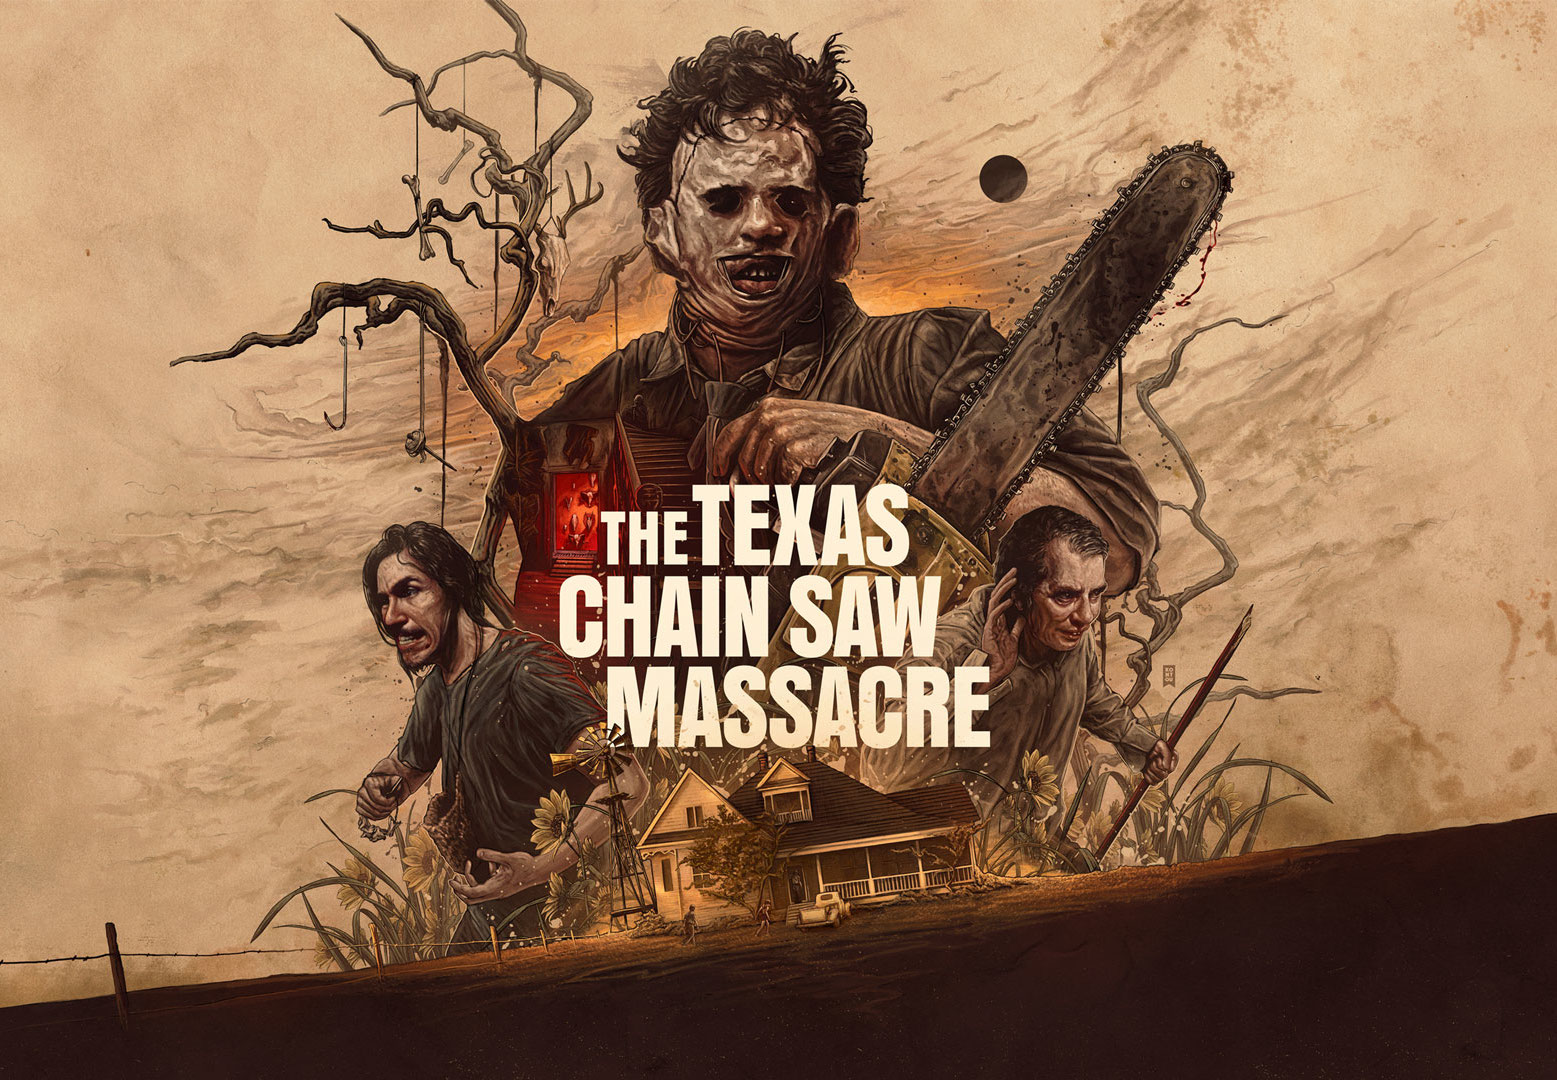 The Texas Chain Saw Massacre PlayStation 4 Account Pixelpuffin.net Activation Link